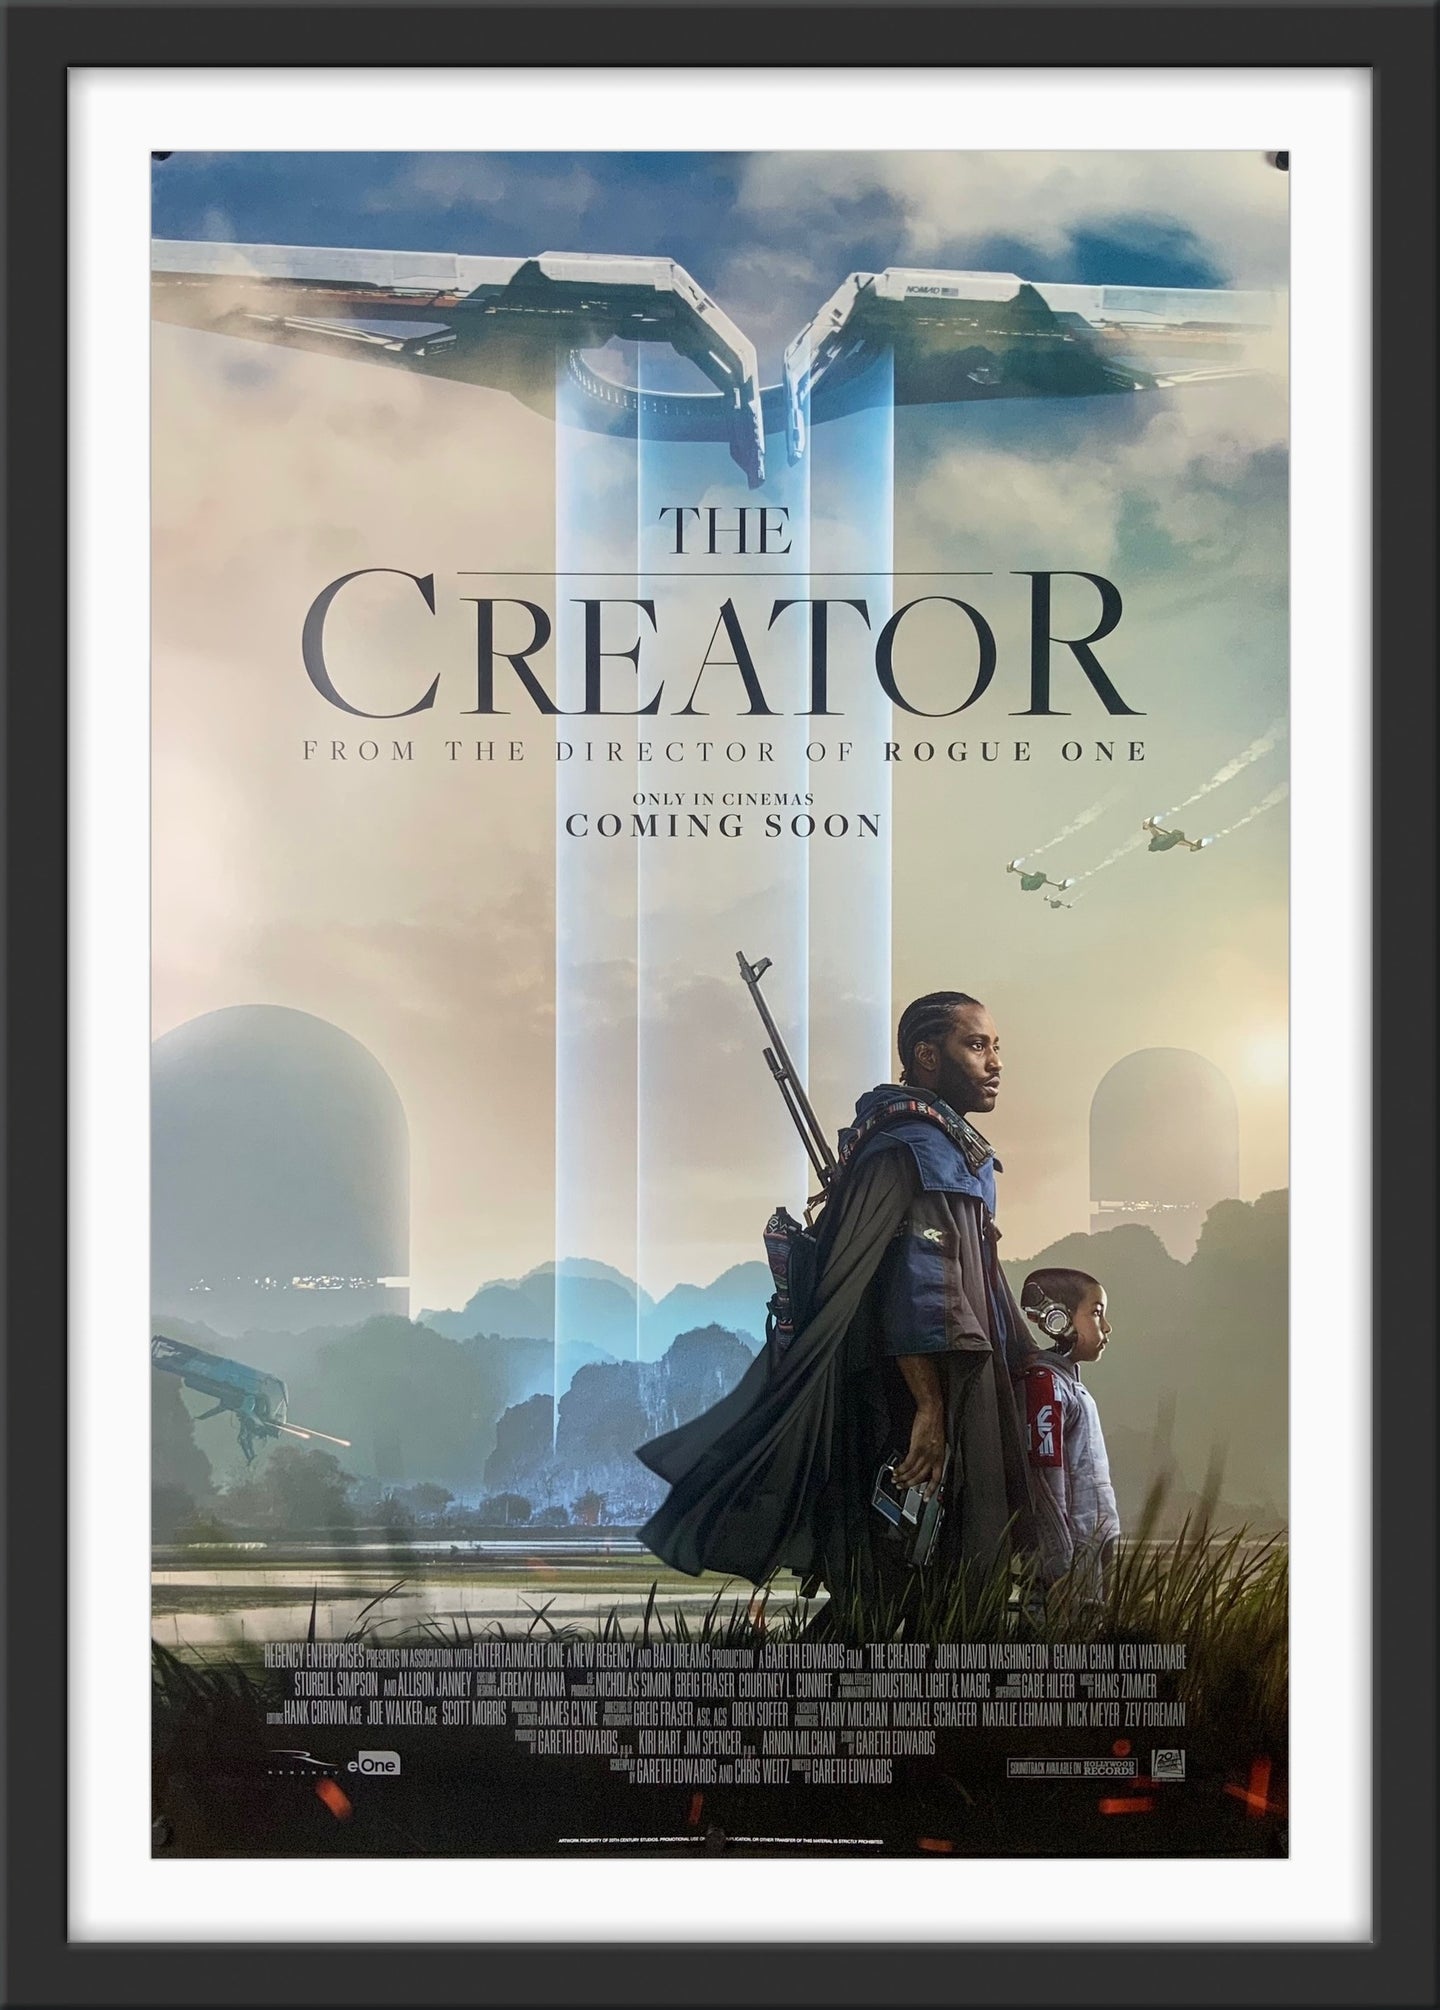 An original movie poster for The Creator